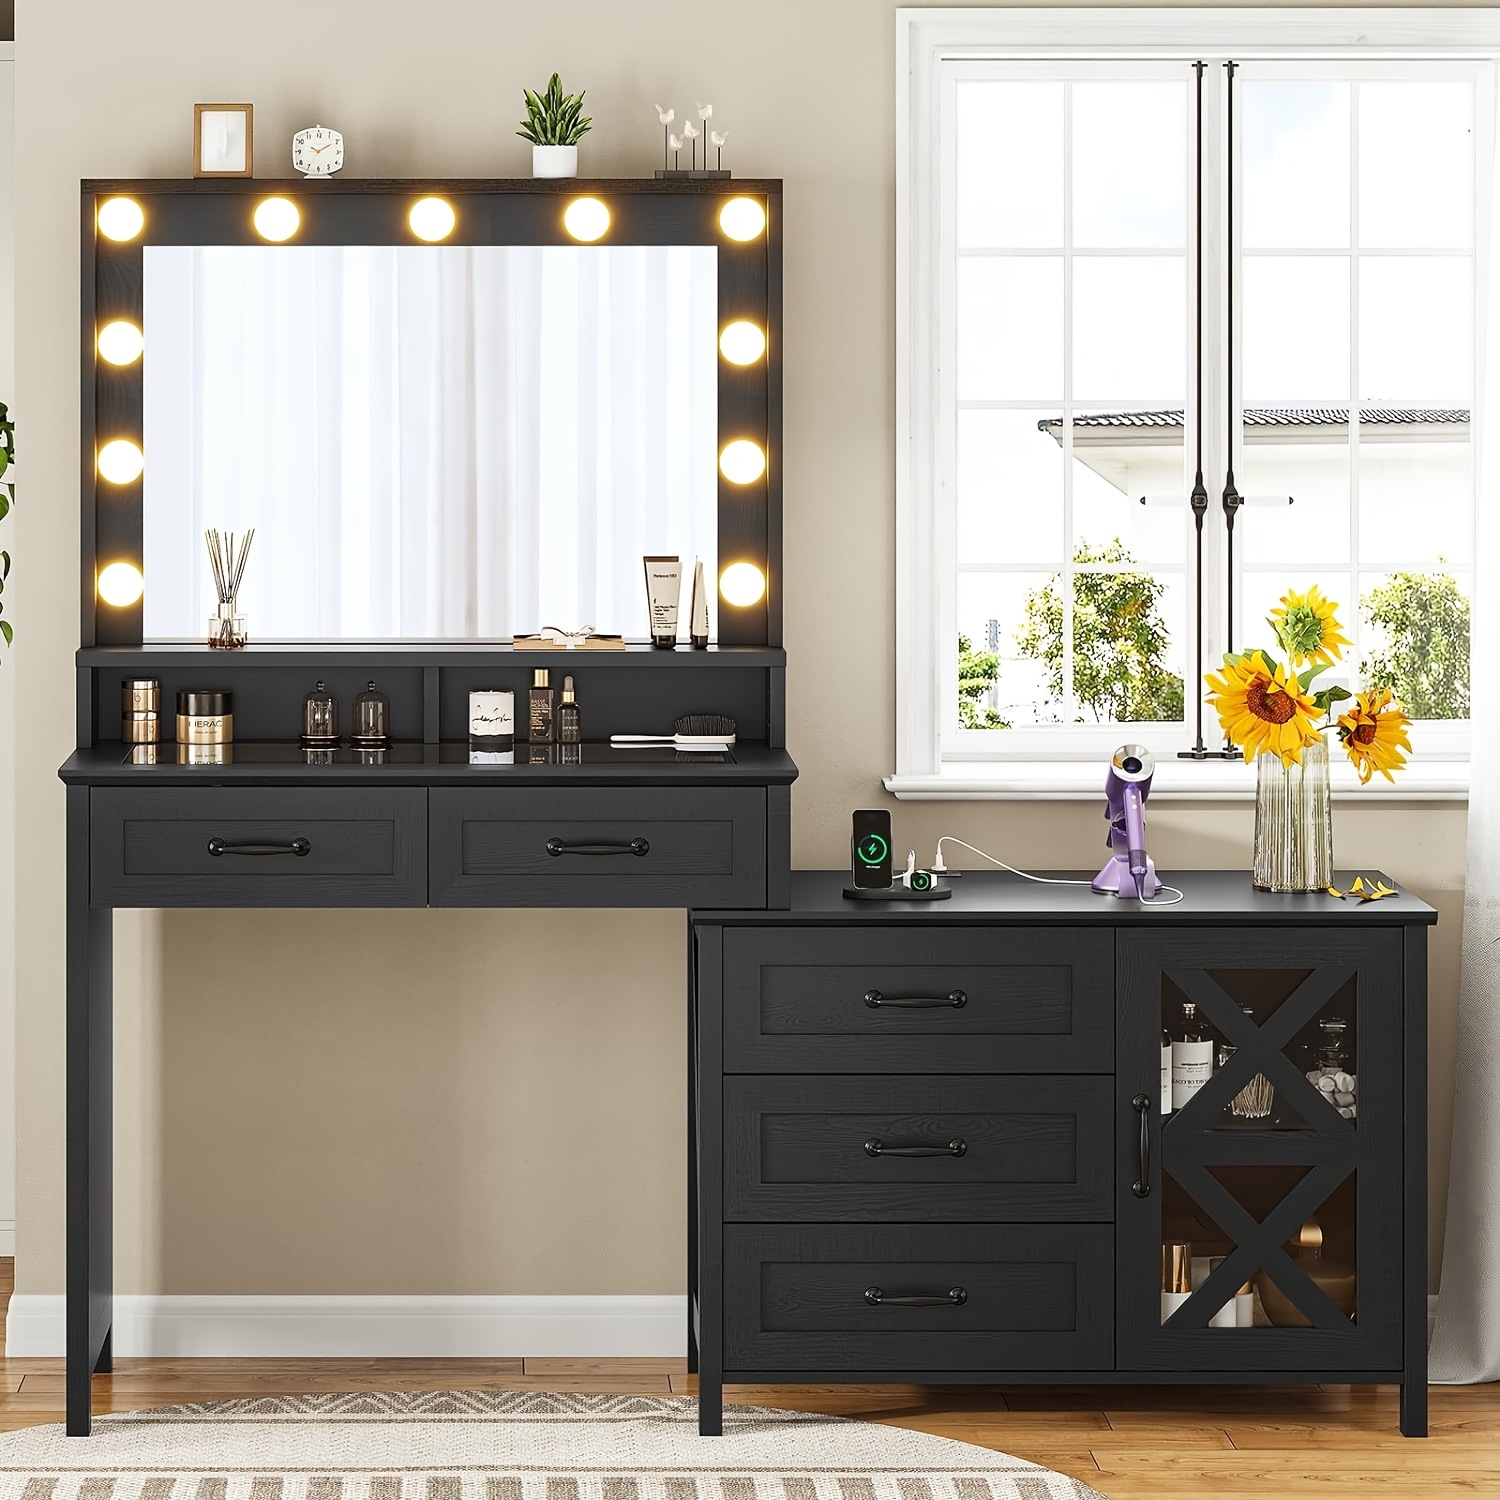 

Makeup Vanity Desk With Large Mirror&charging Station&drawers, Farmhouse Vanity Table With Glass Top For Women Girls, Black